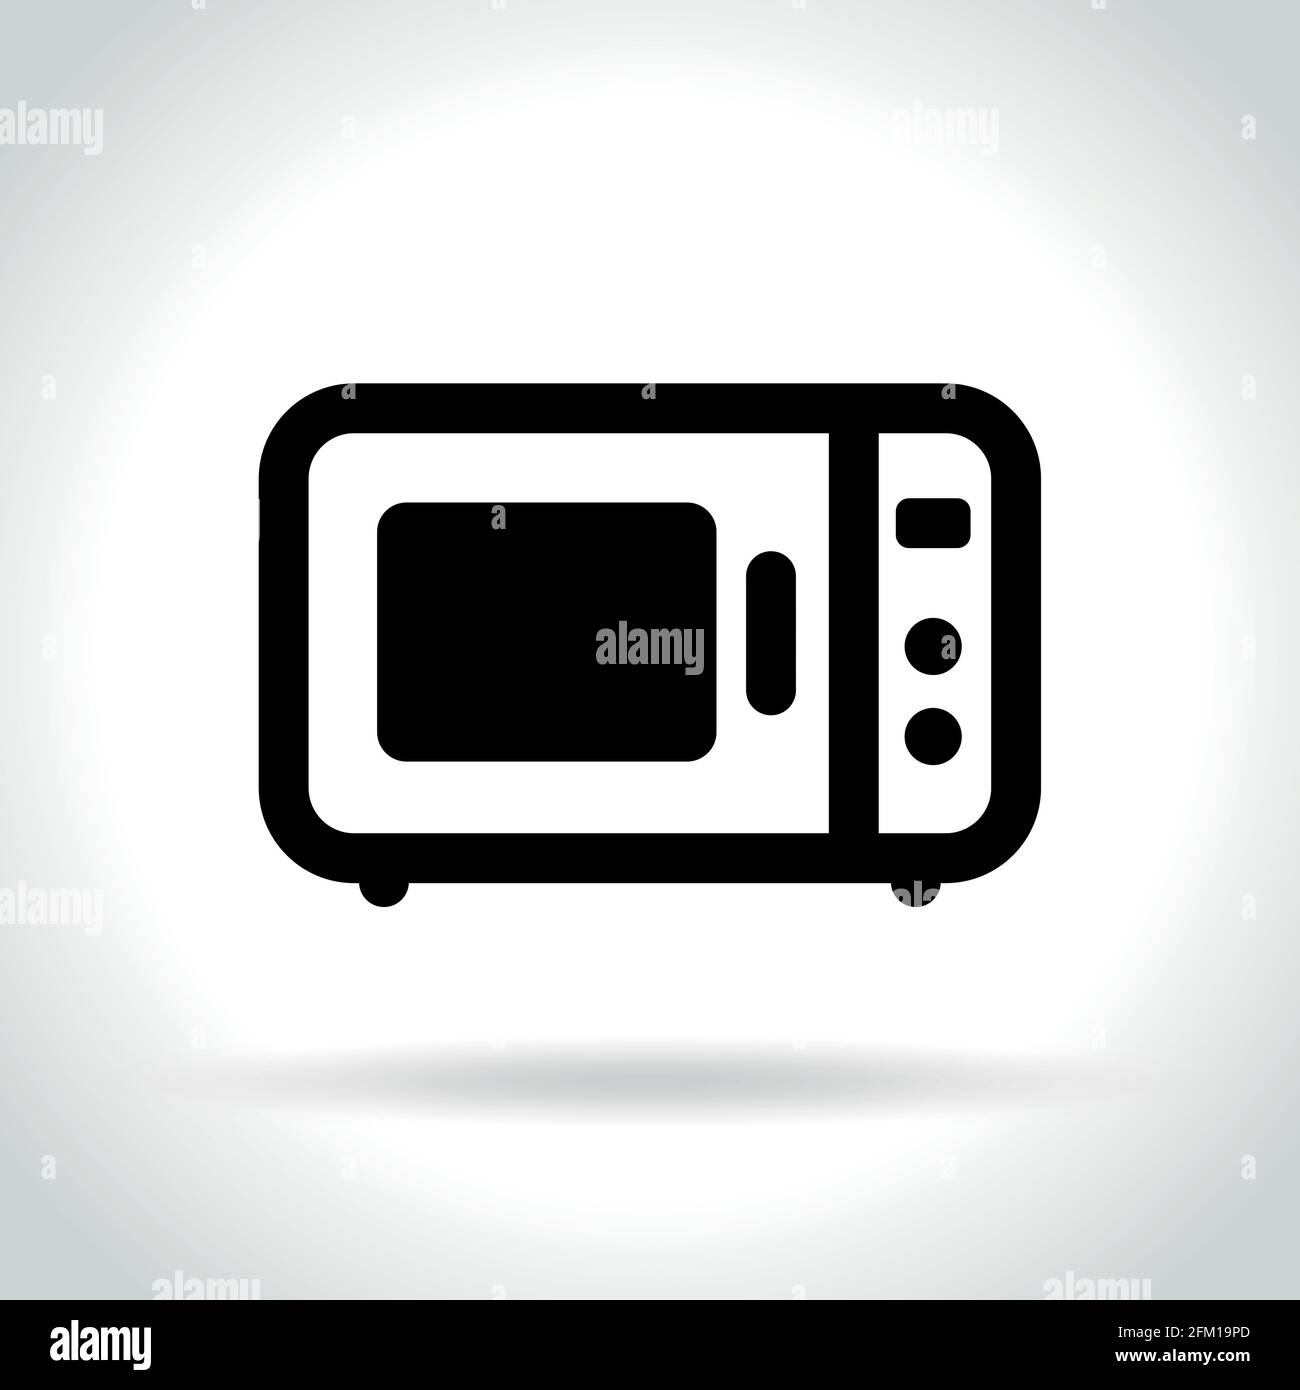 Illustration of microwave oven icon on white background Stock Vector